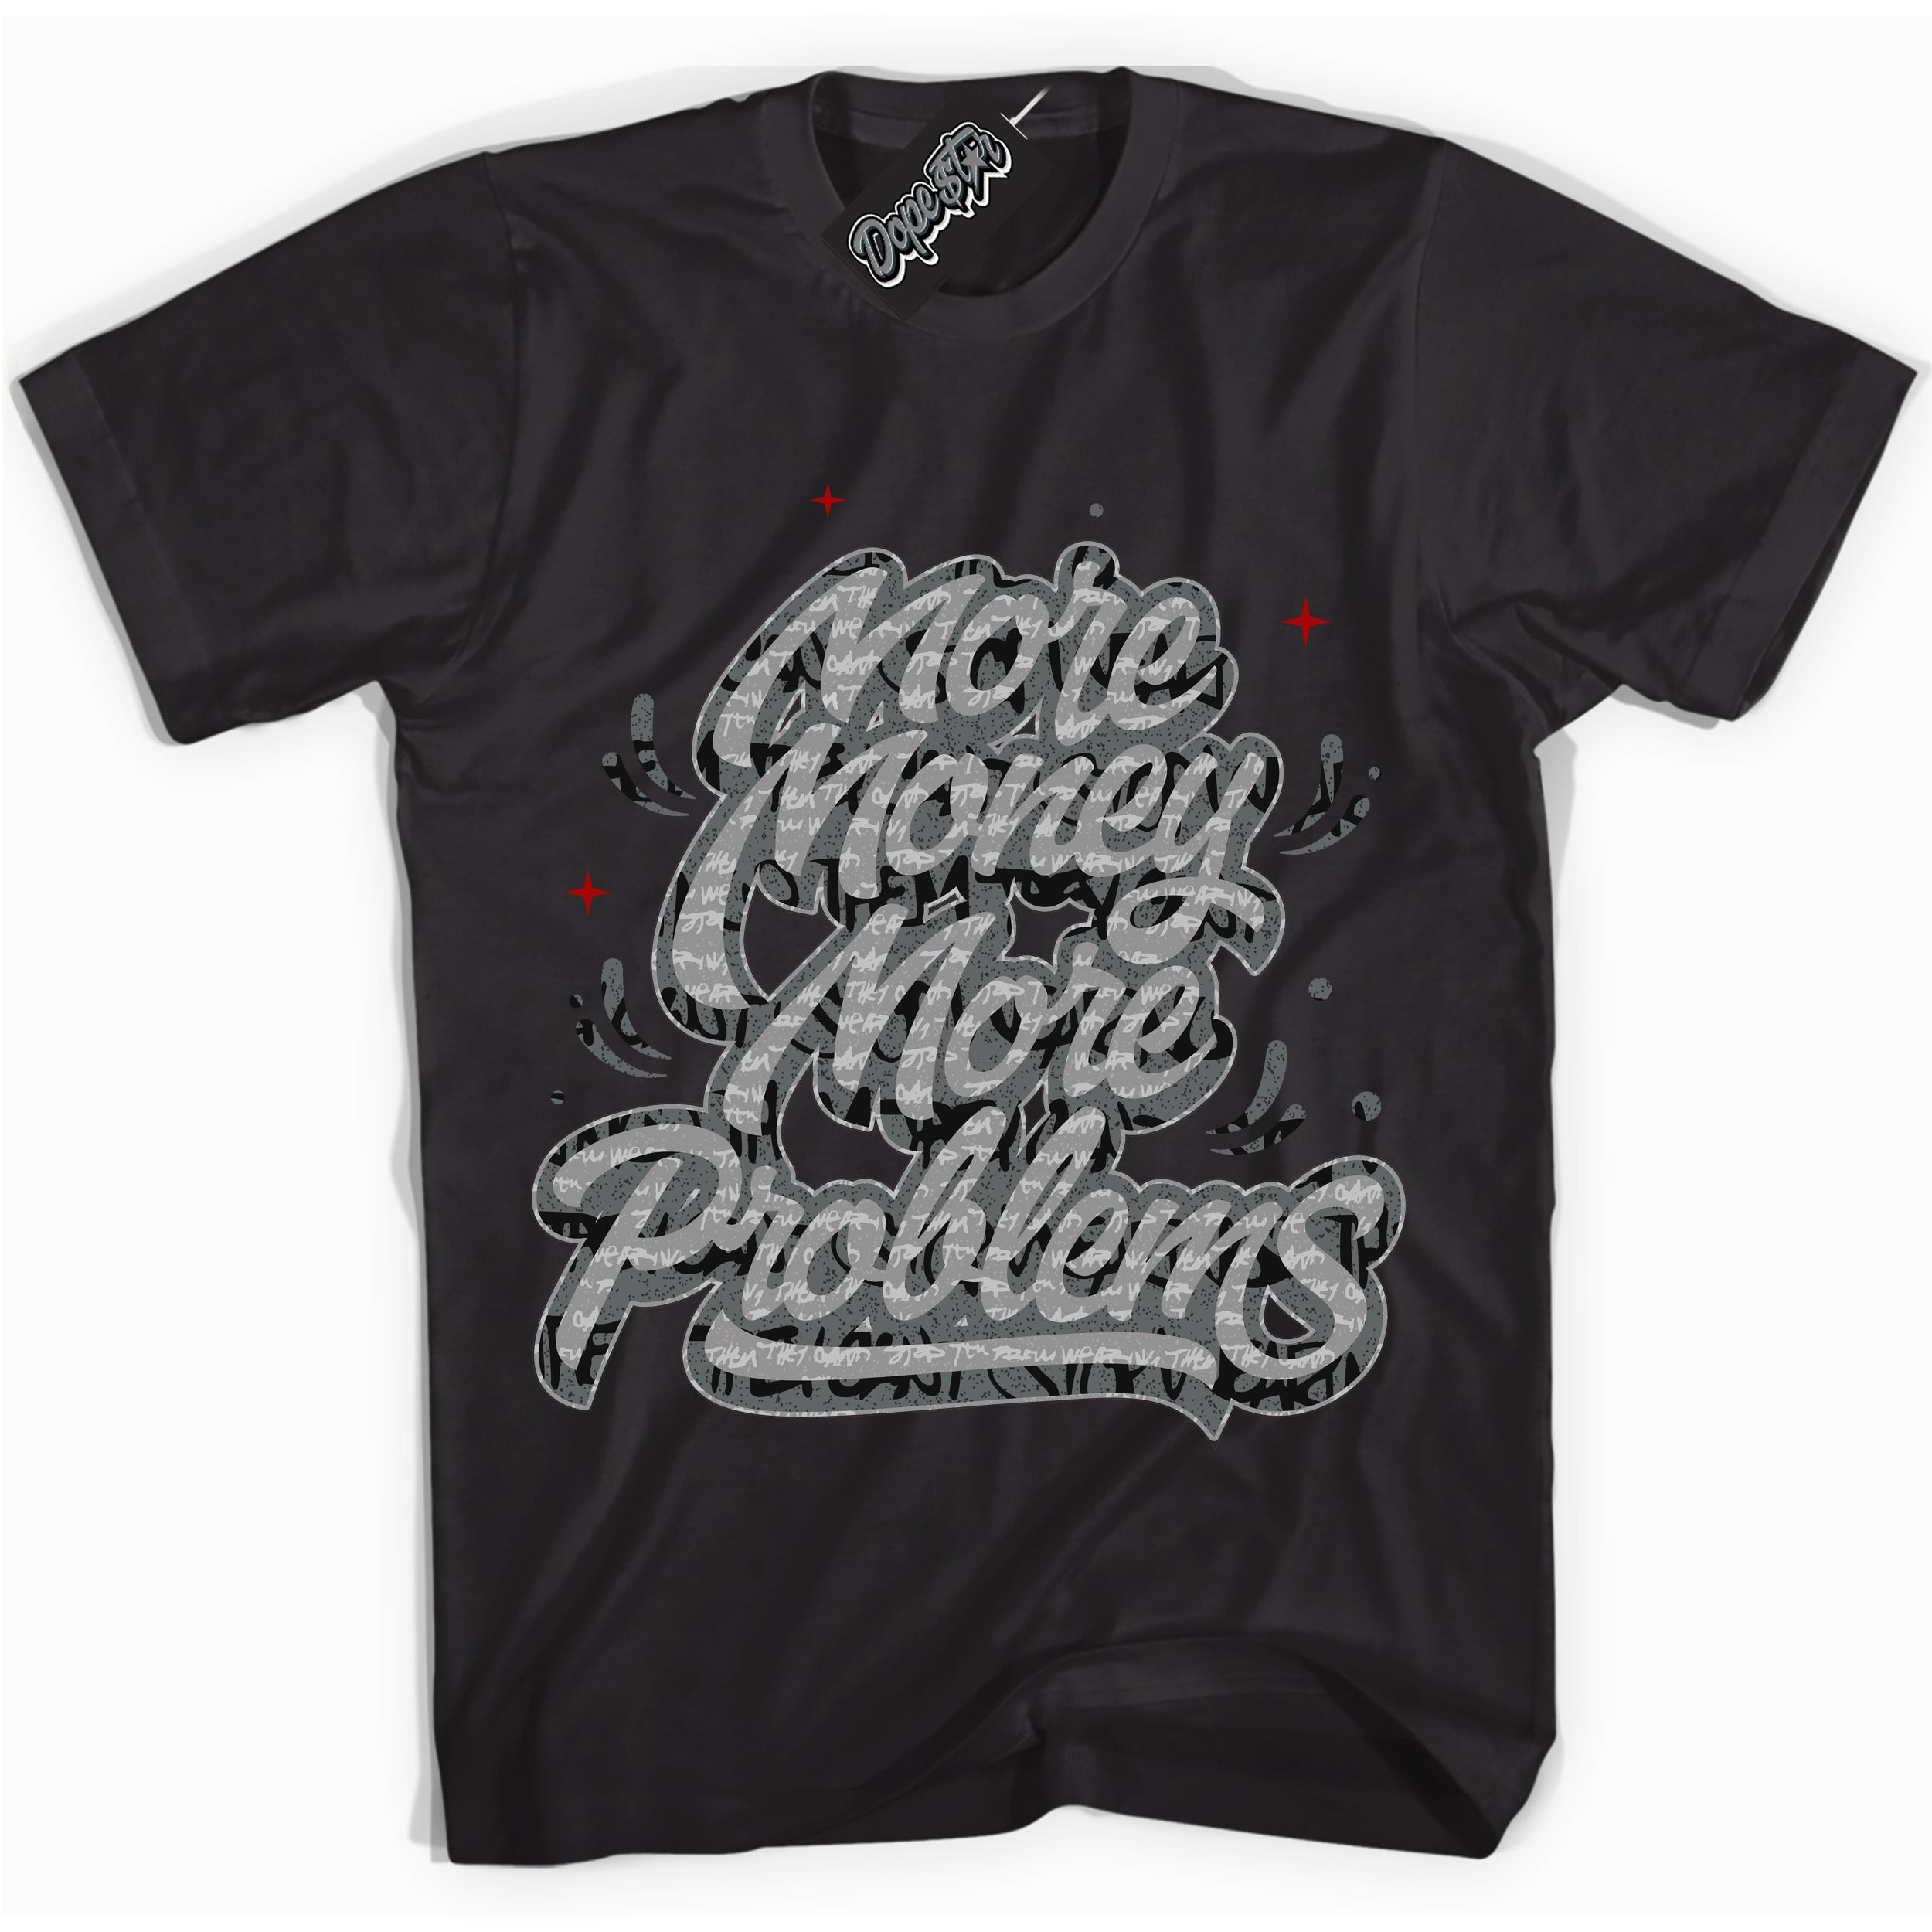 Cool Black Shirt with “ More Money More Problems ” design that perfectly matches Rebellionaire 1s Sneakers.